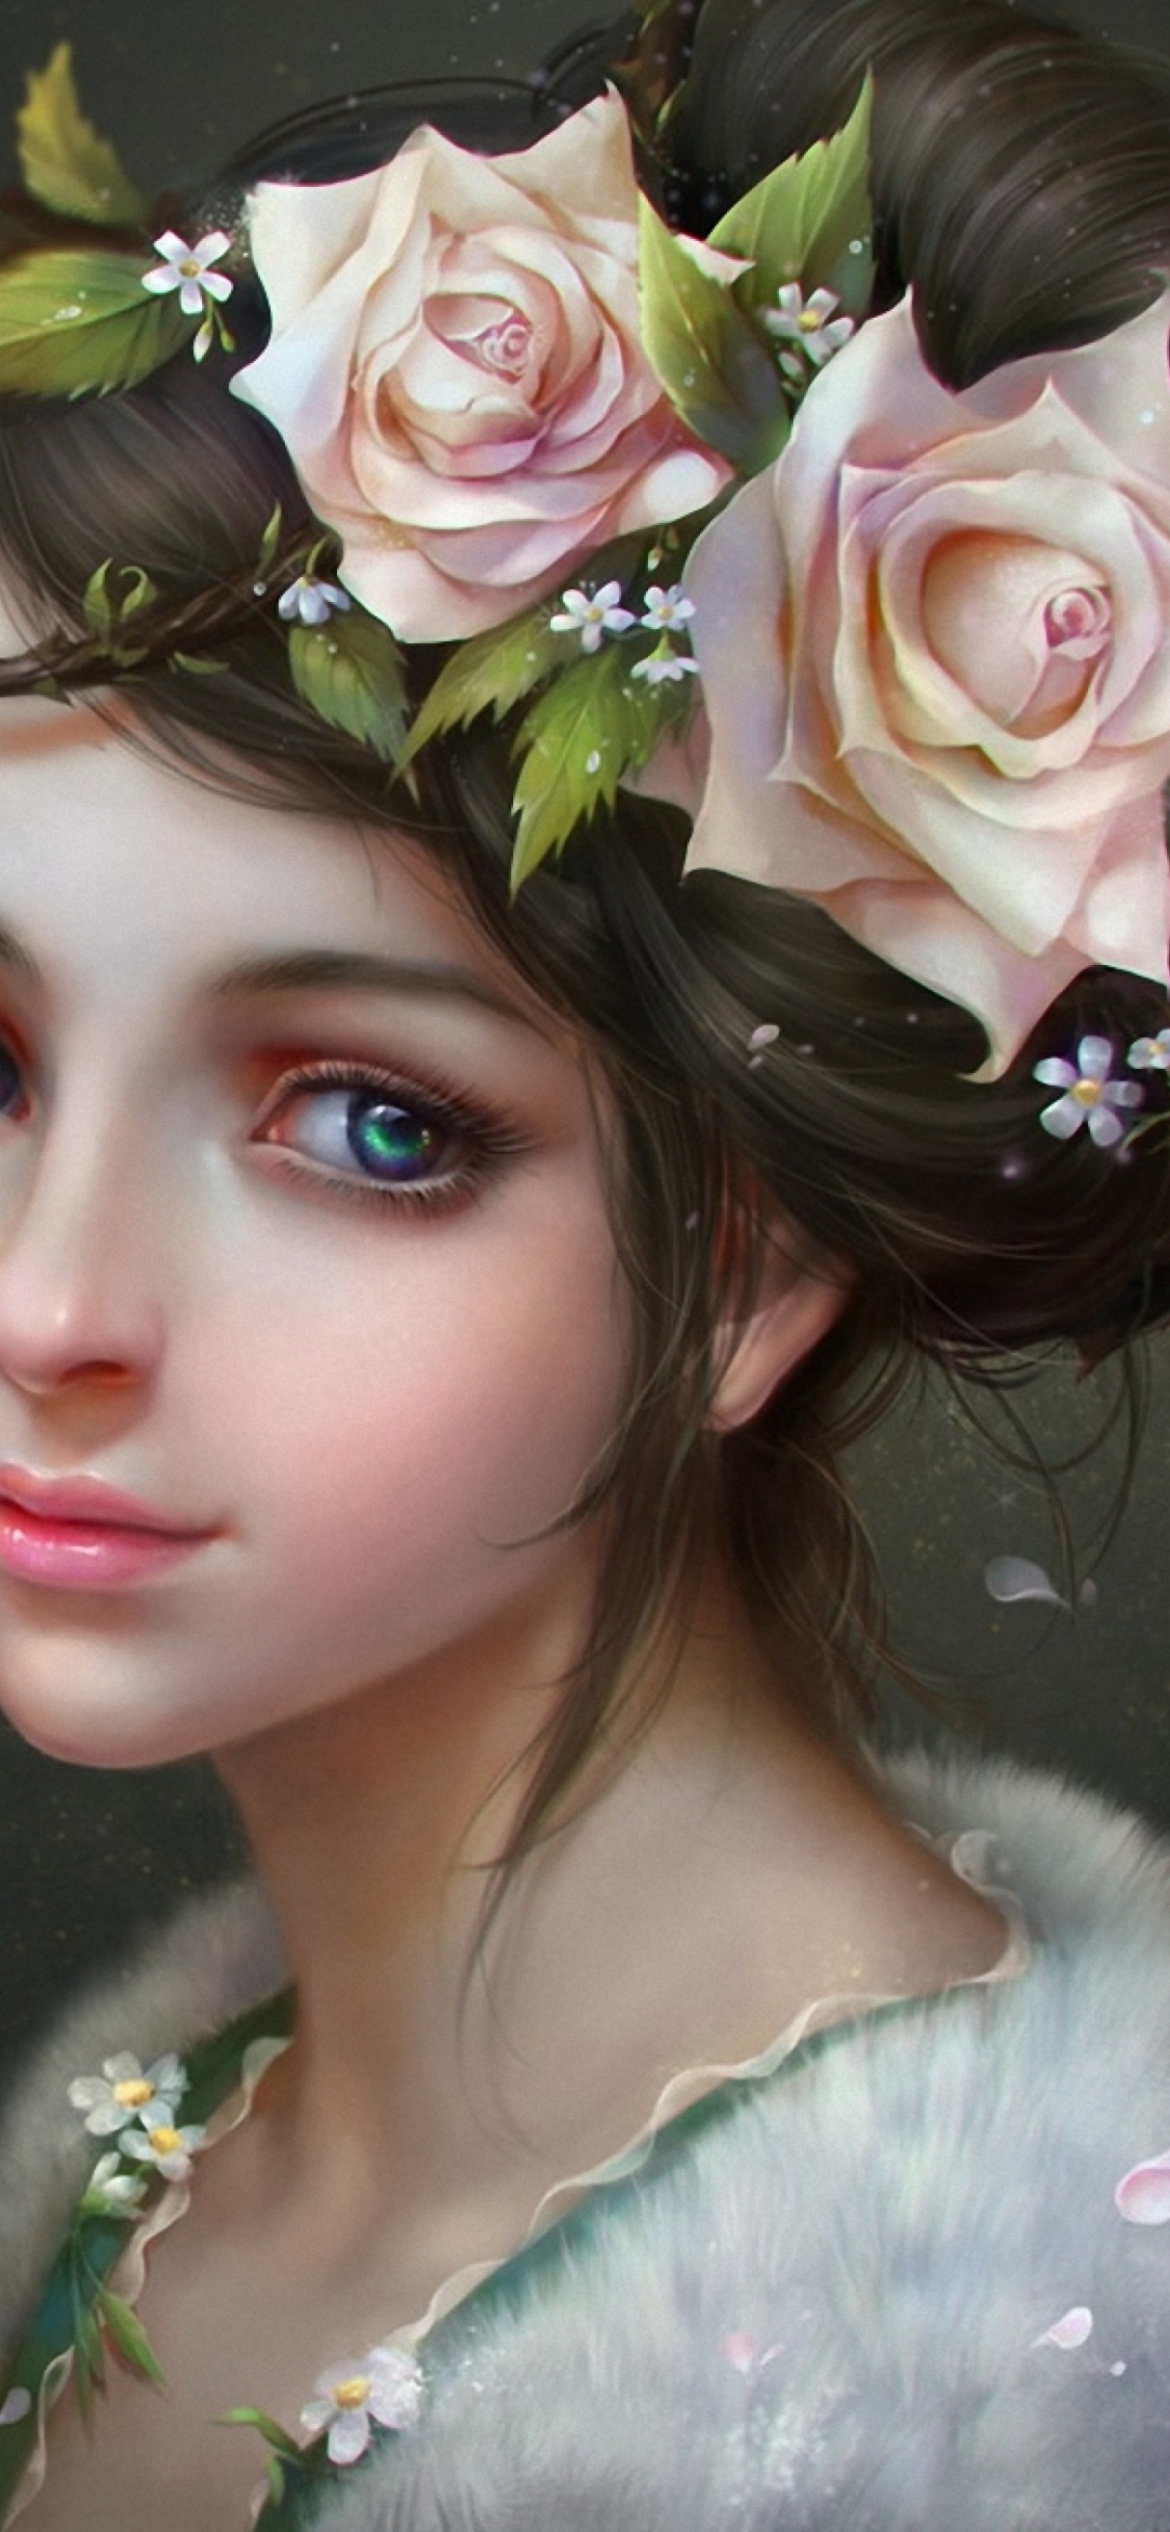 Girl With Roses In Her Hair Painting wallpaper 1170x2532